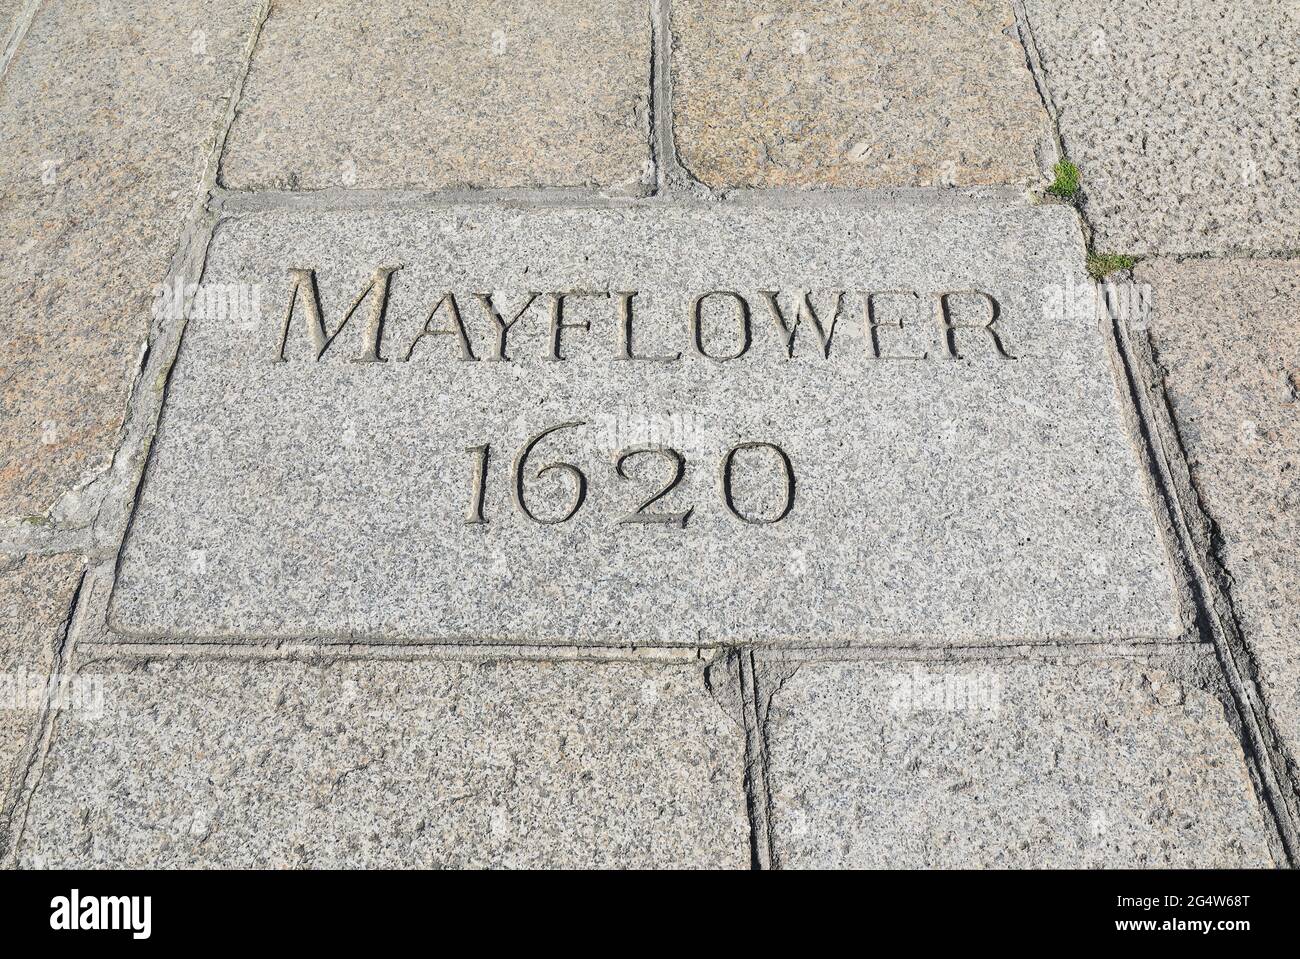 The granite stone marking the approximate site from where the Mayflower ship sailed to America with 102 pilgrims in 1620, in Plymouth, Devon Stock Photo